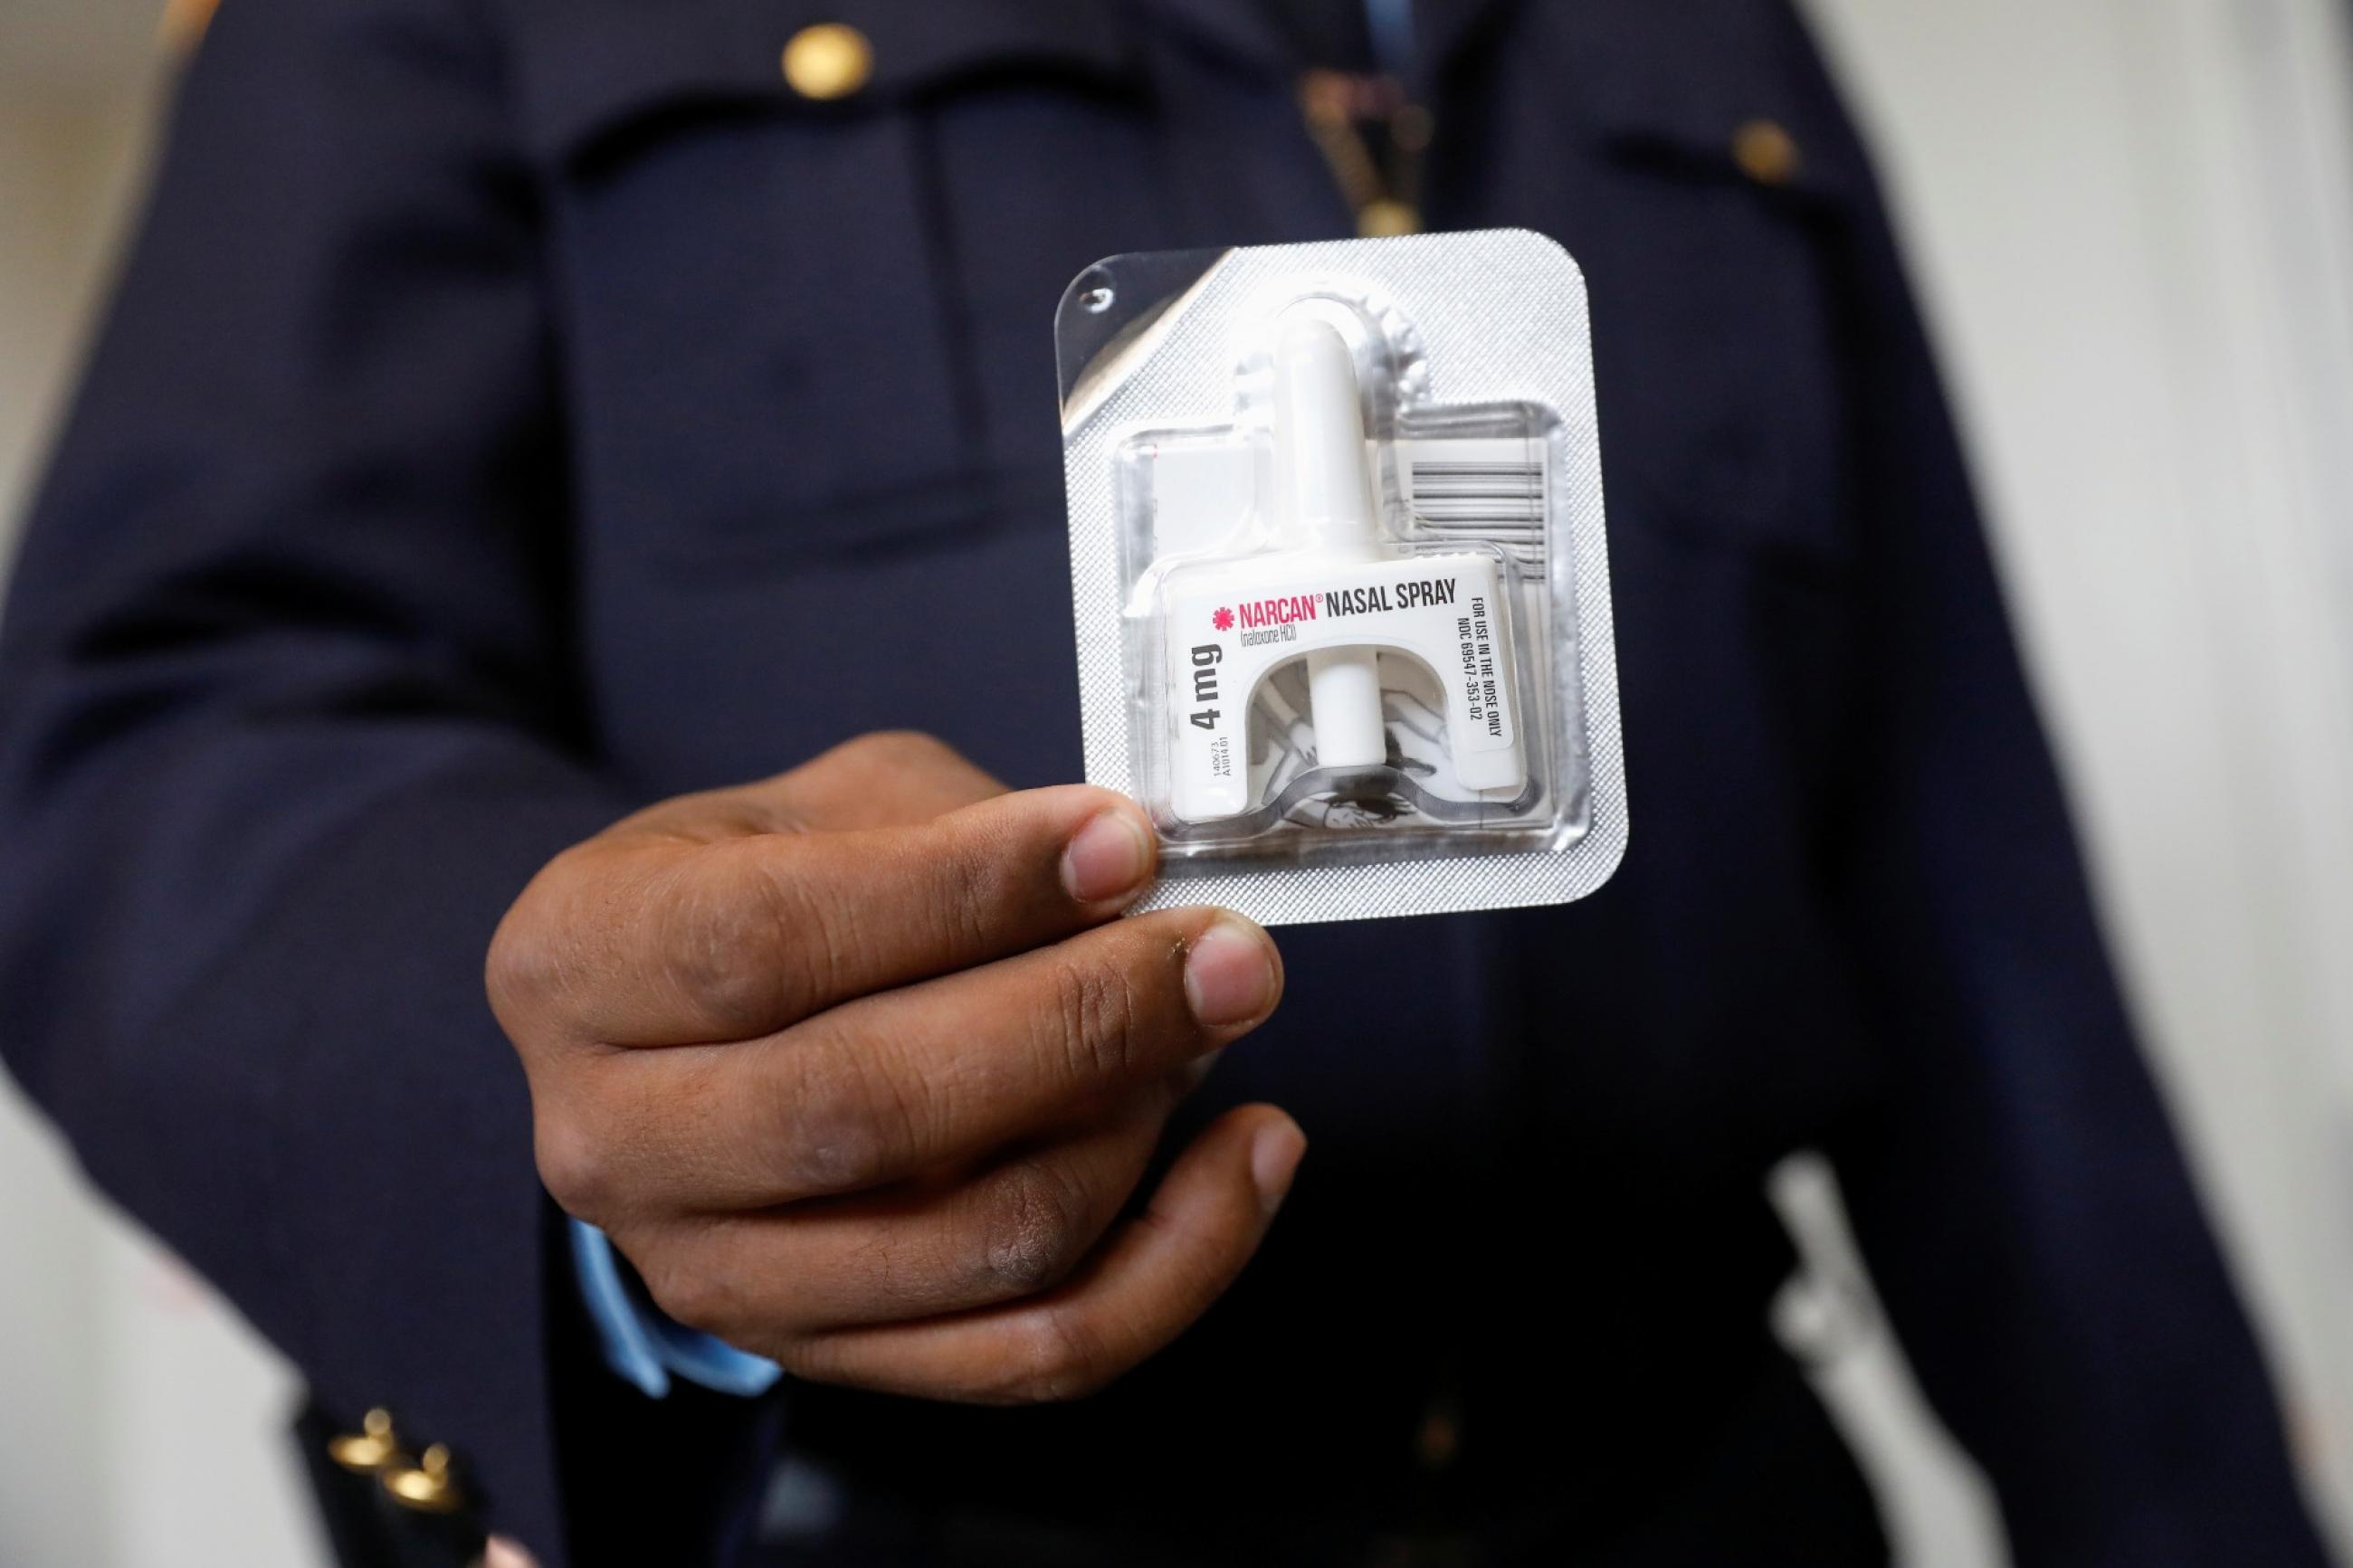 Corrections officer Anthony Willingham displays Naloxone nasal spray, part of an opioid anti-overdose medicine kit for inmates to take with them upon release, before a training session for inmates at the Queensboro Correctional Facility in Queens, New York, U.S., April 9, 2018. 